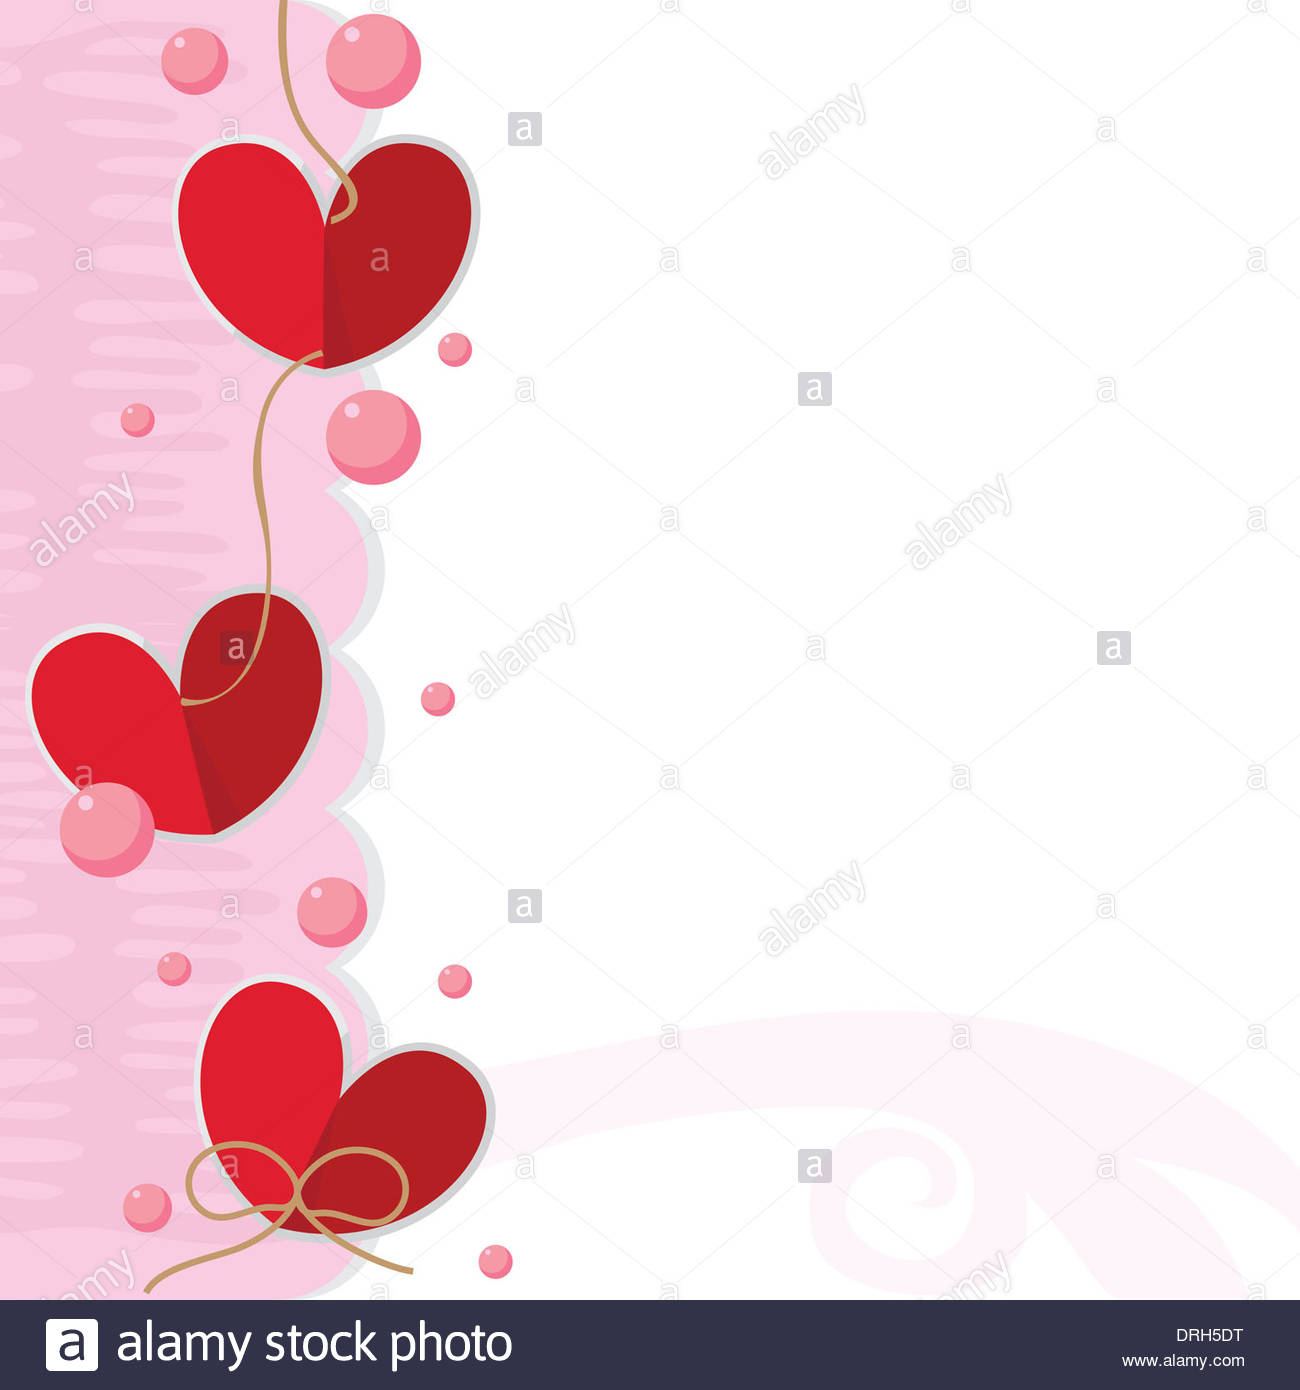 Love Background For Wedding And Valentine Card Designs Stock Photo